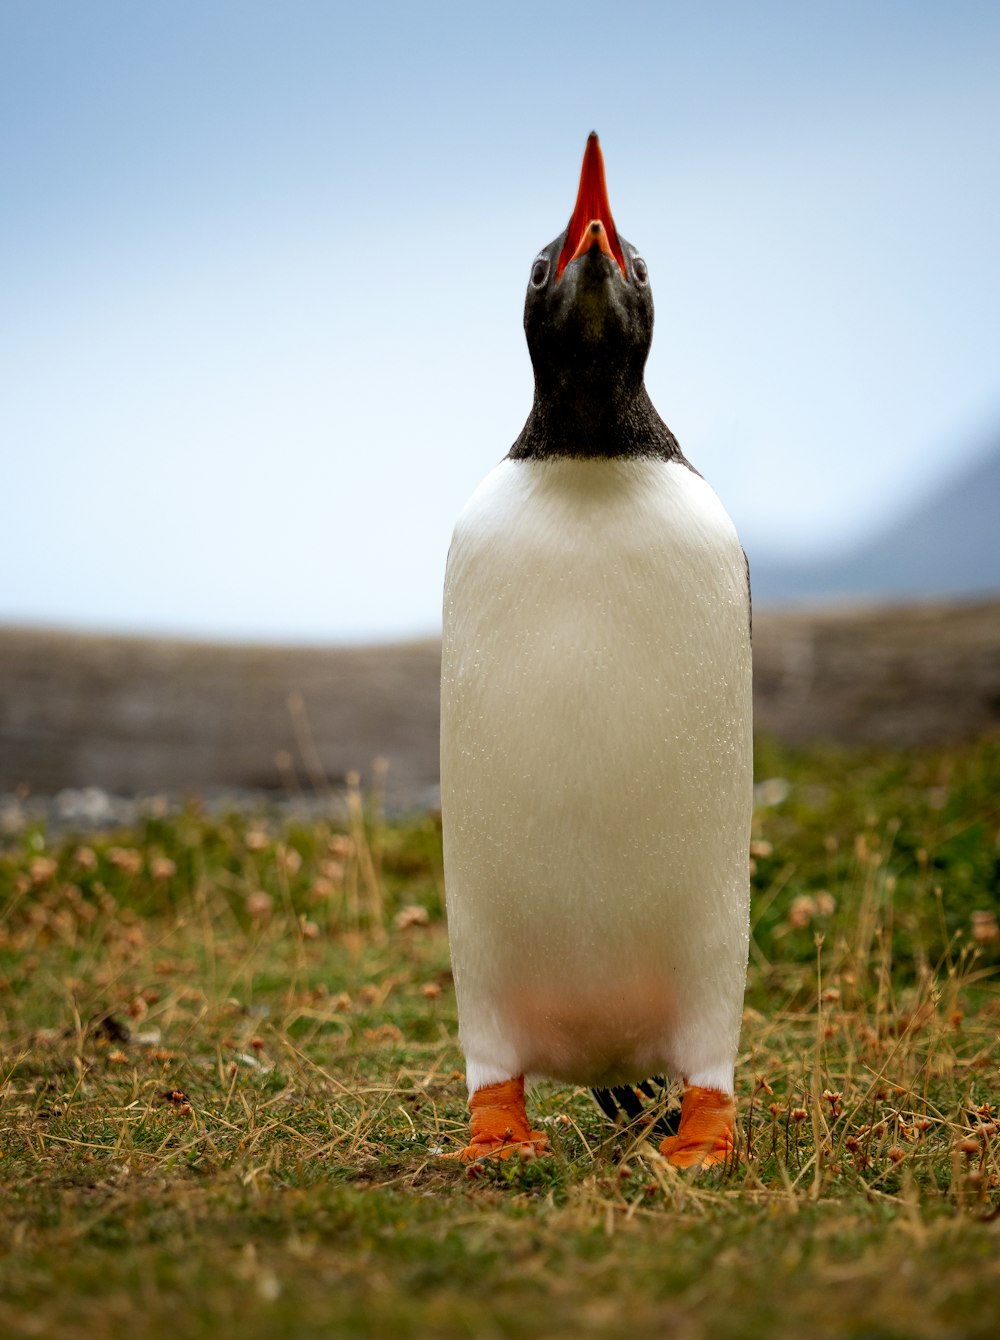 a penguin with a red beak standing in the grass